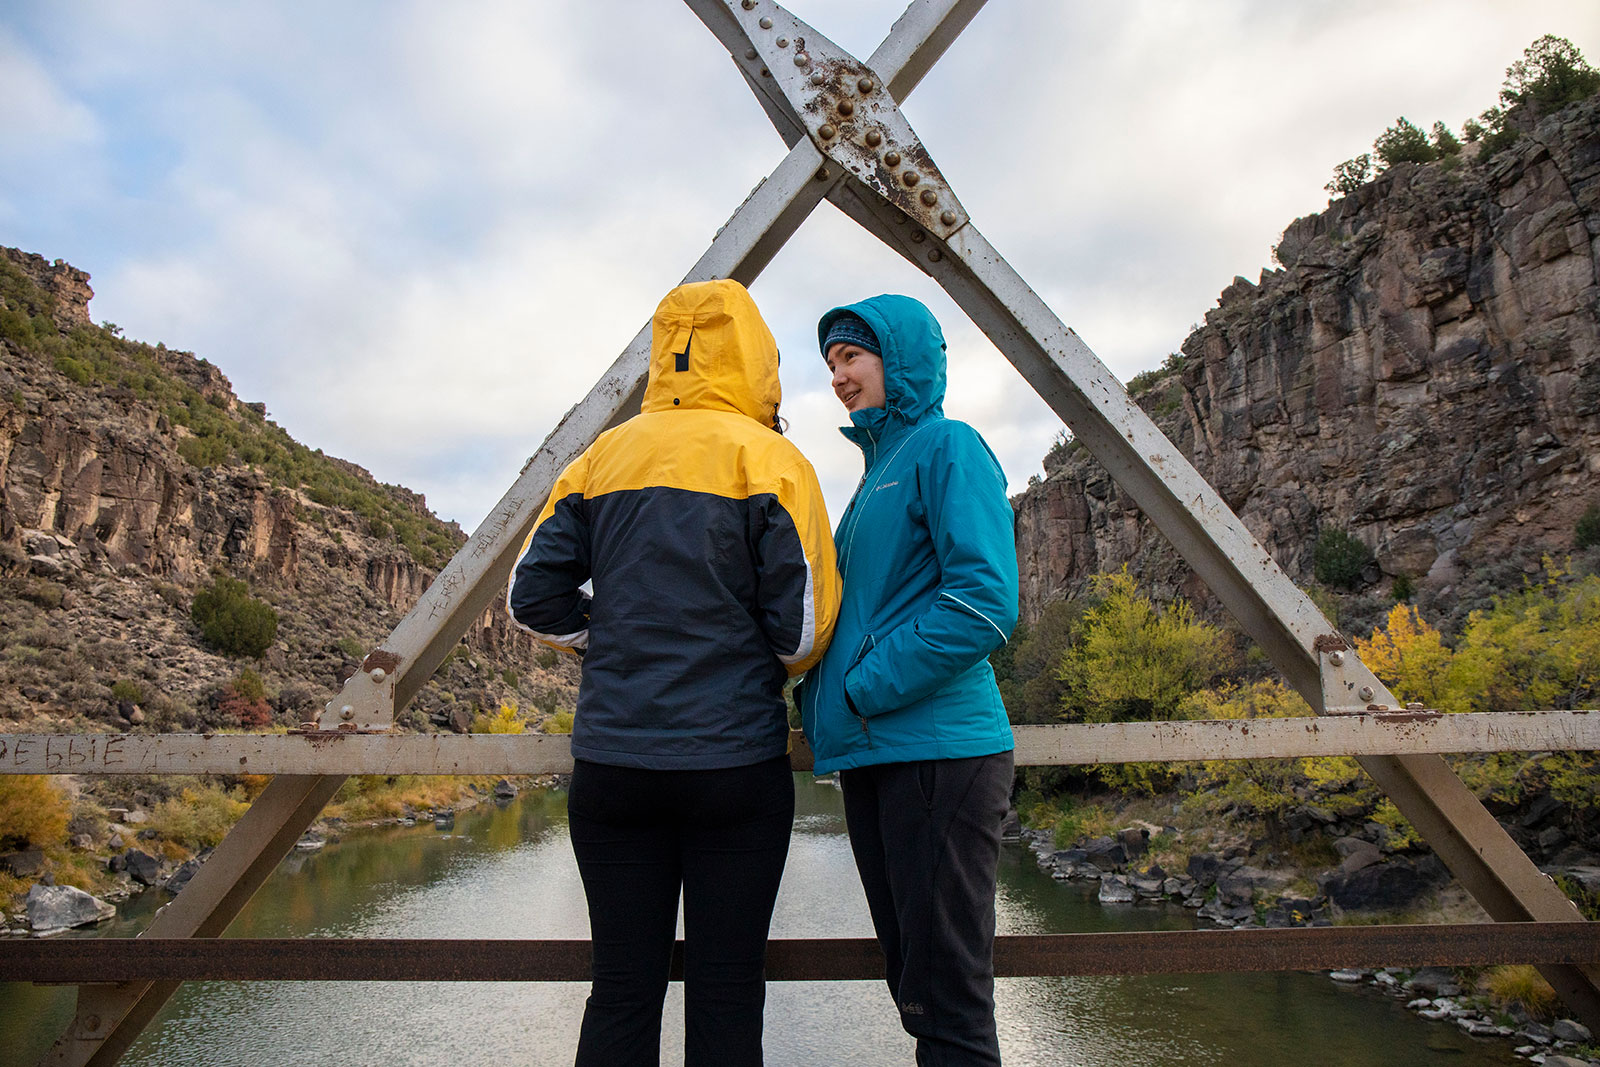 <strong>Lauren Stierman ’22</strong> and <strong>Molly Maier ’22</strong> talk on a bridge over the Rio Grande River before going on a hike.